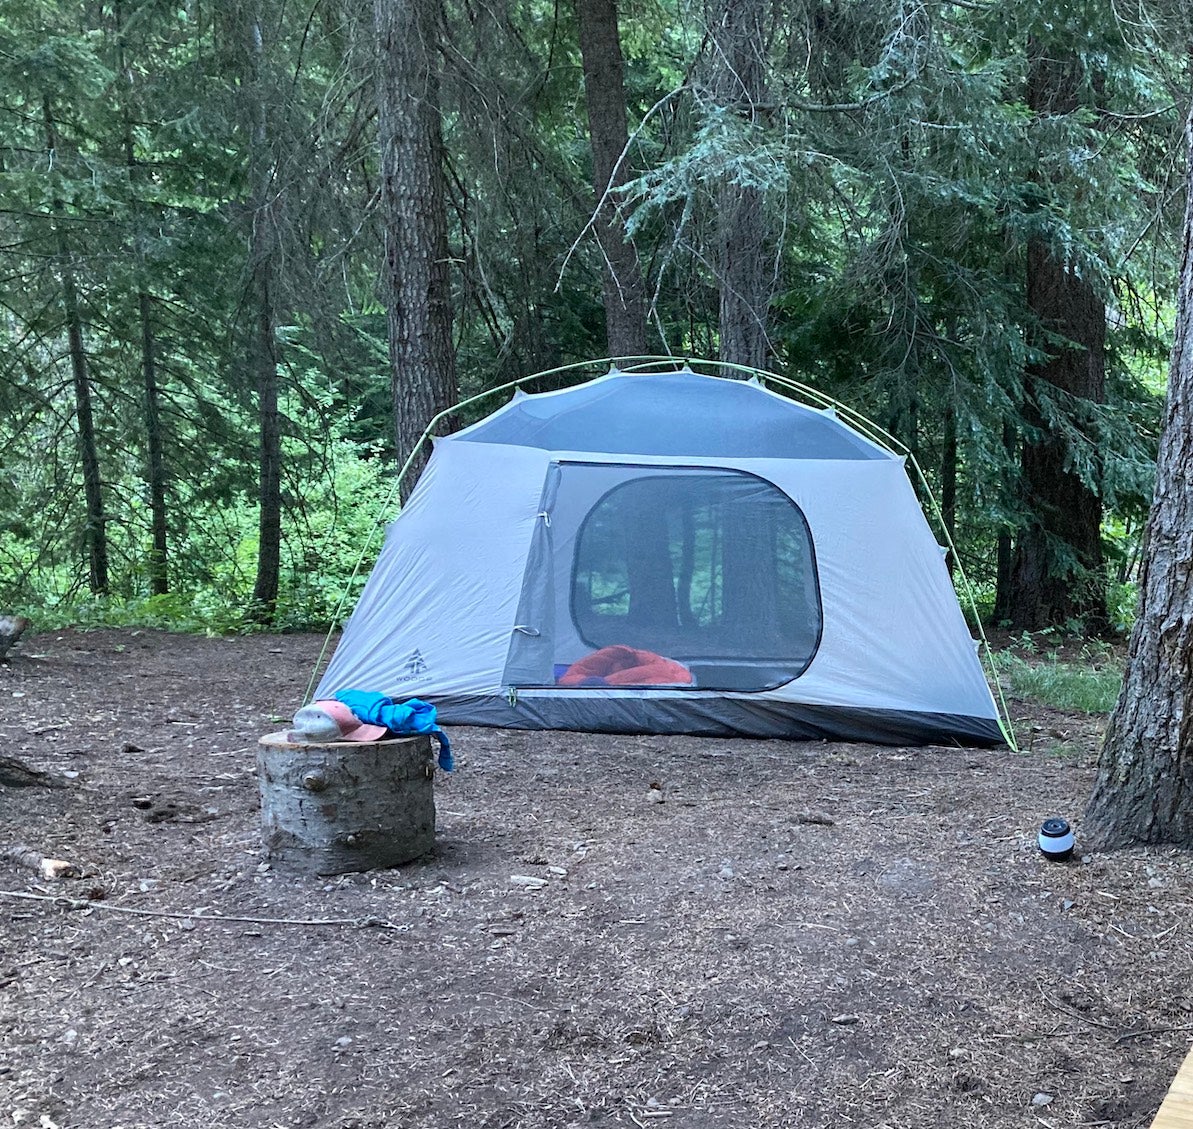 Woods Lookout 6-Person tent at campsite